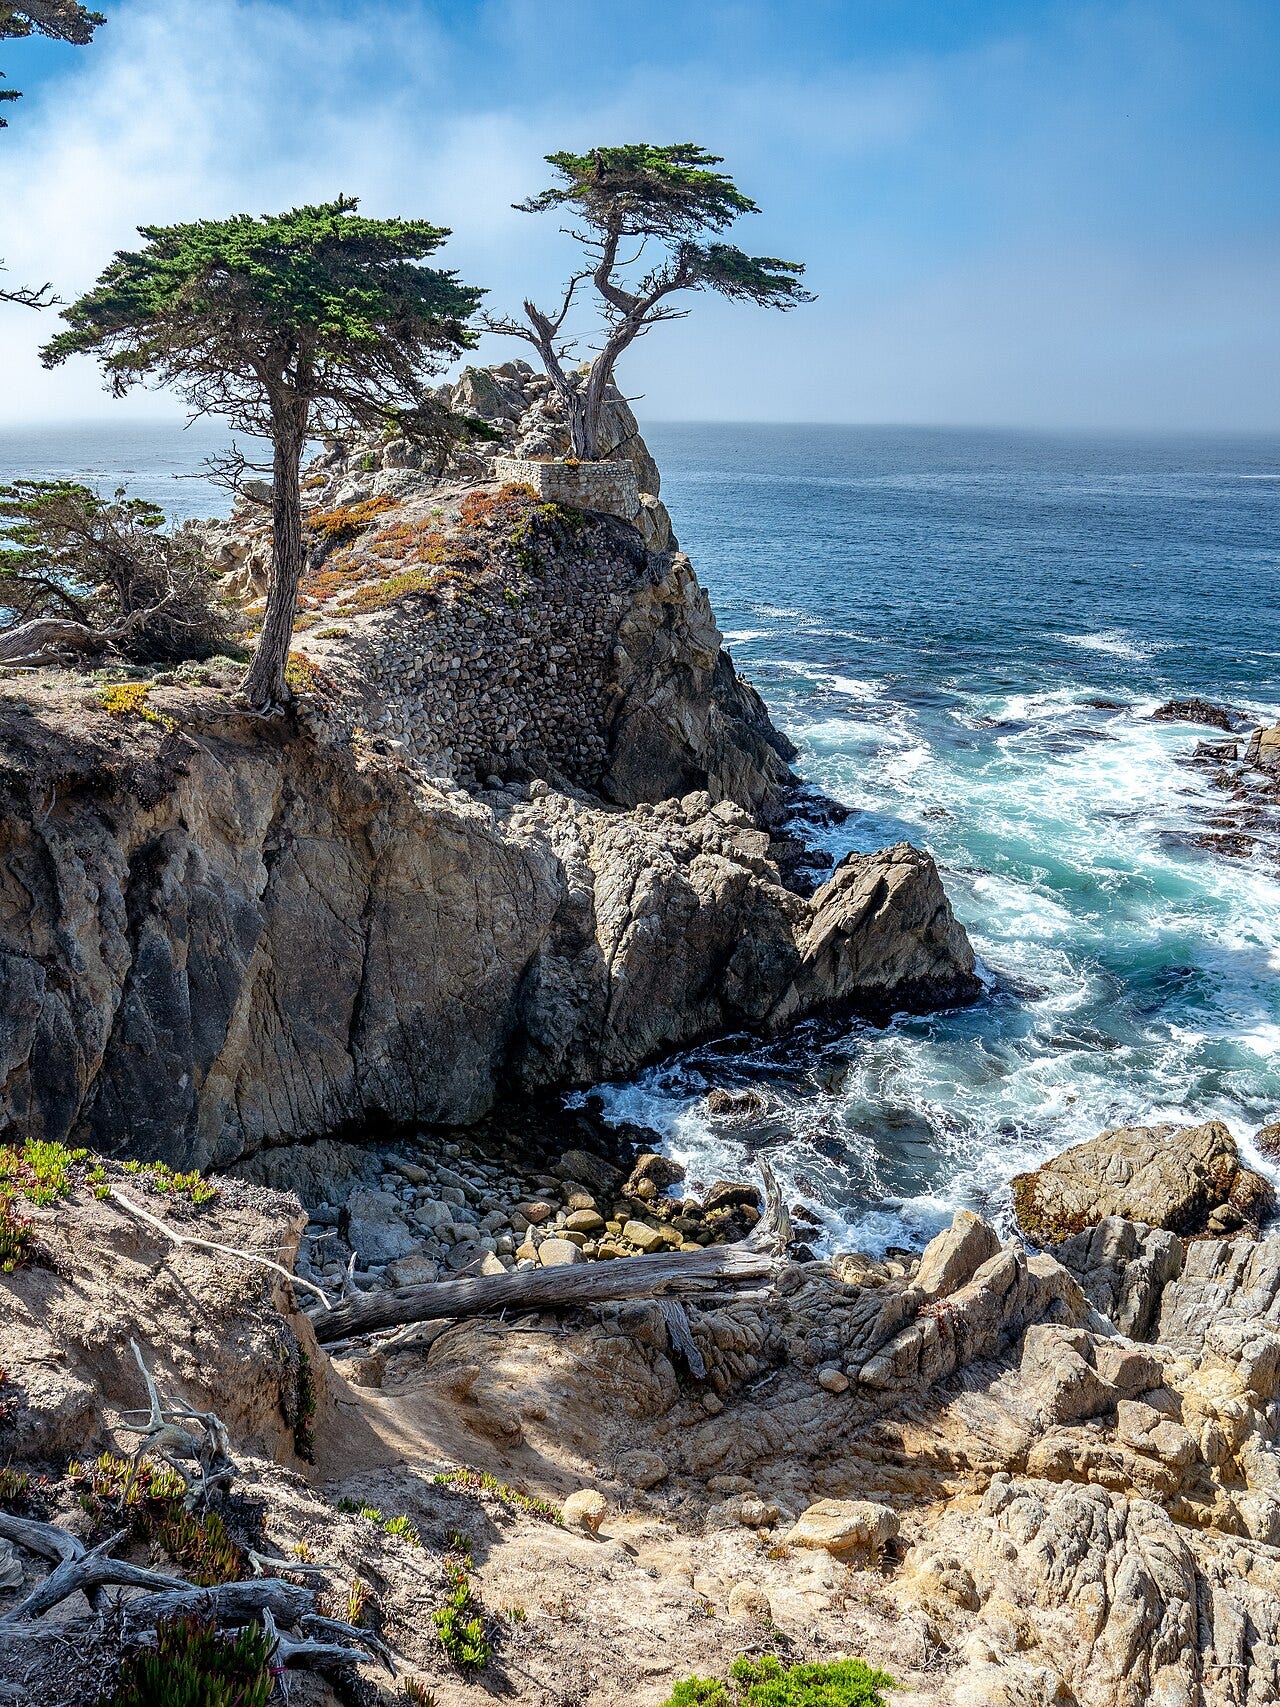 Lone Cypress showing its altered appearance, 2019